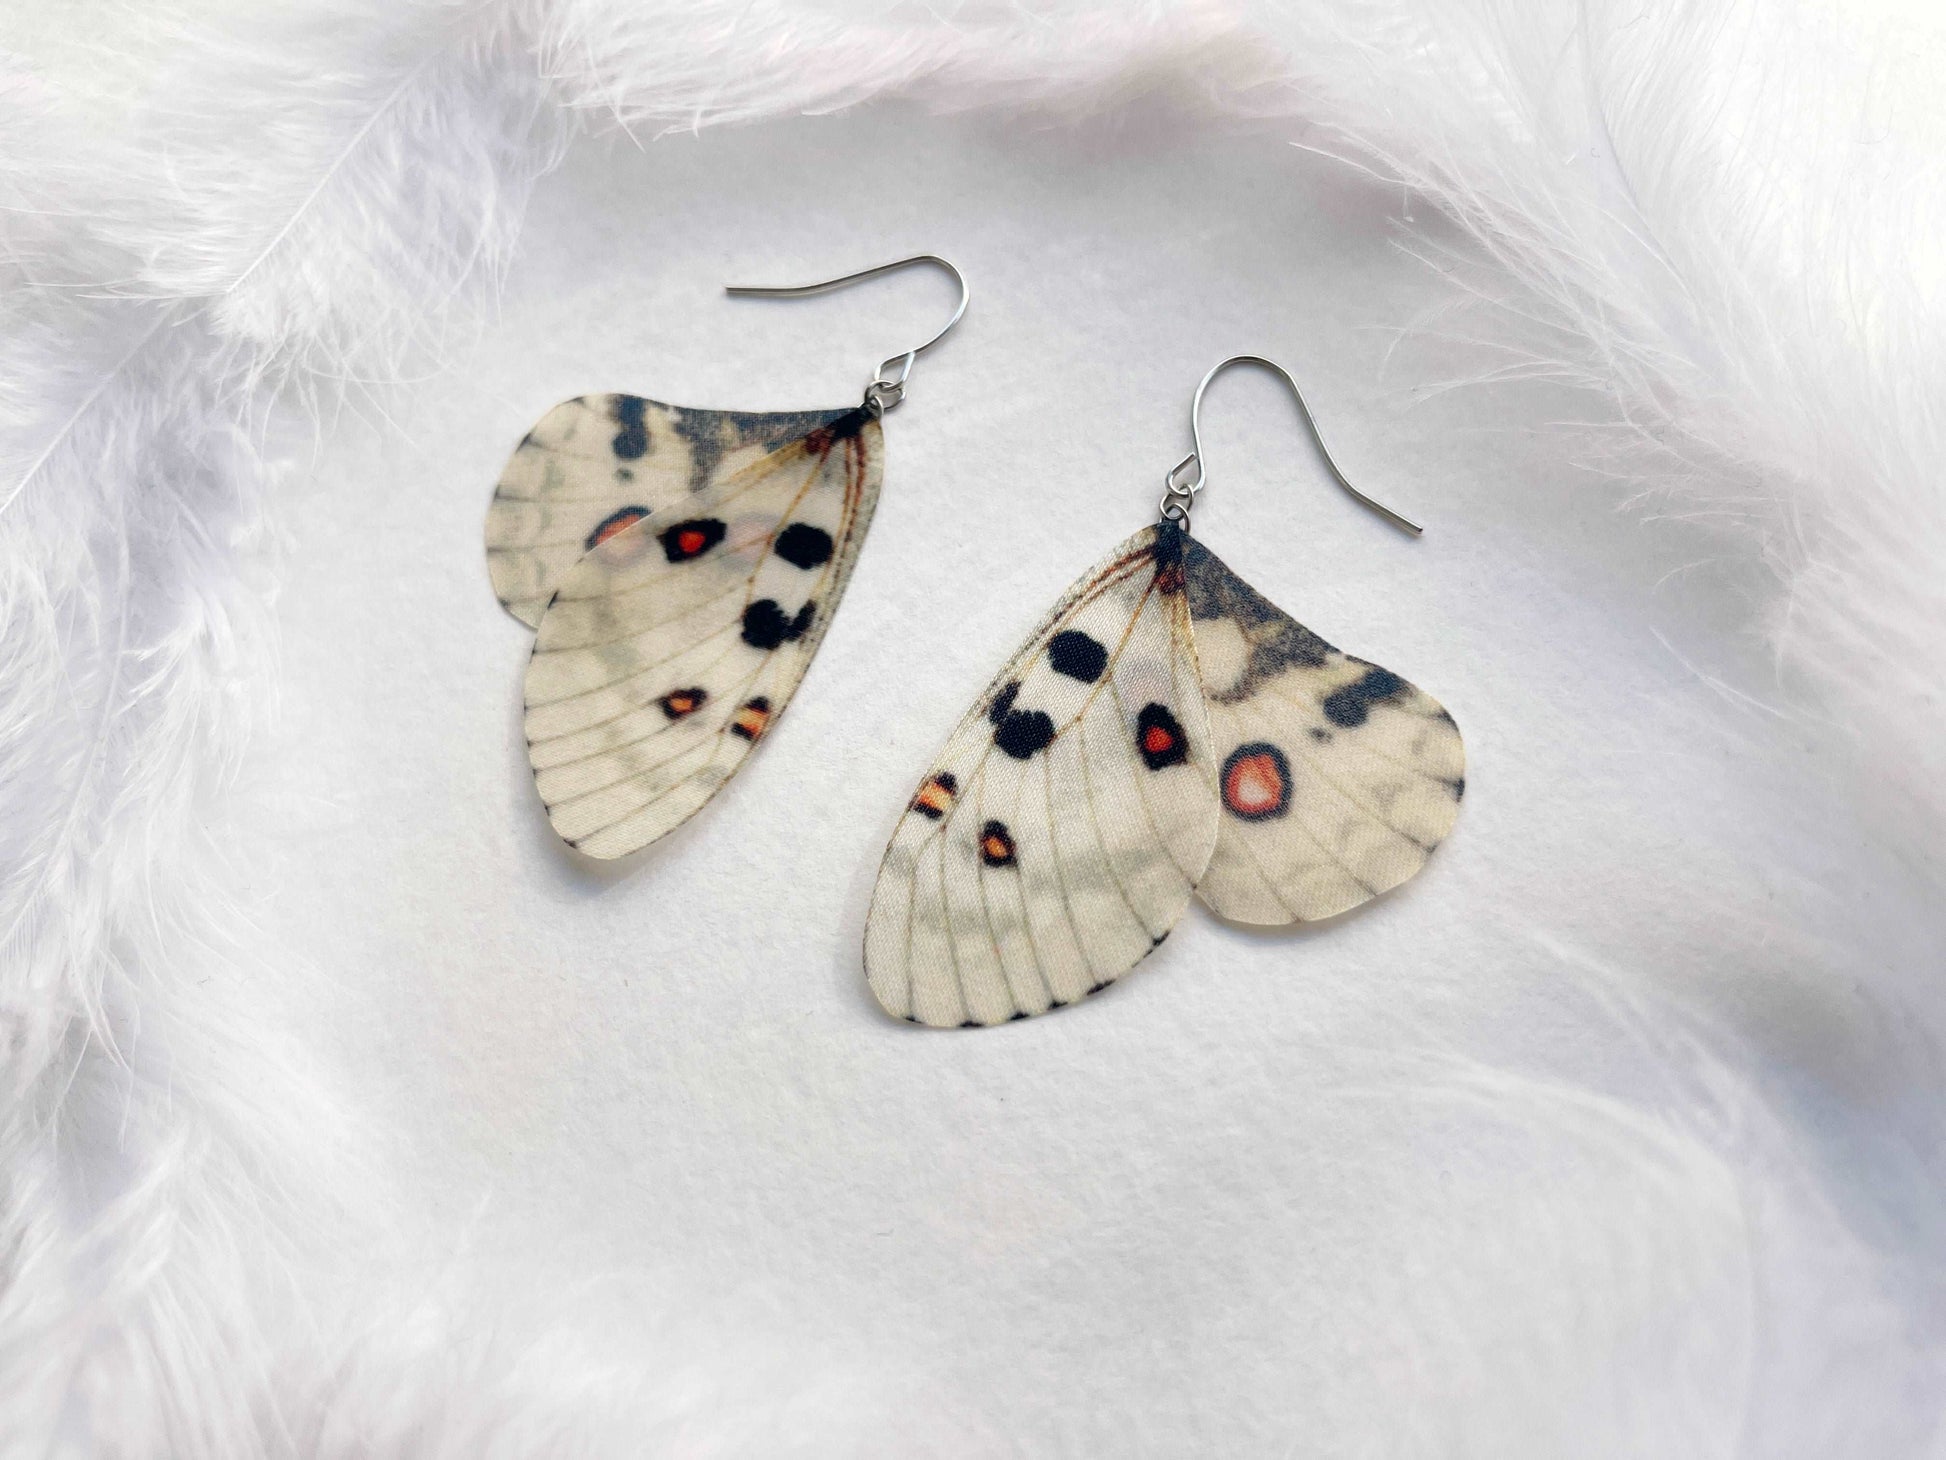 Ivory butterfly wing earrings on a white background